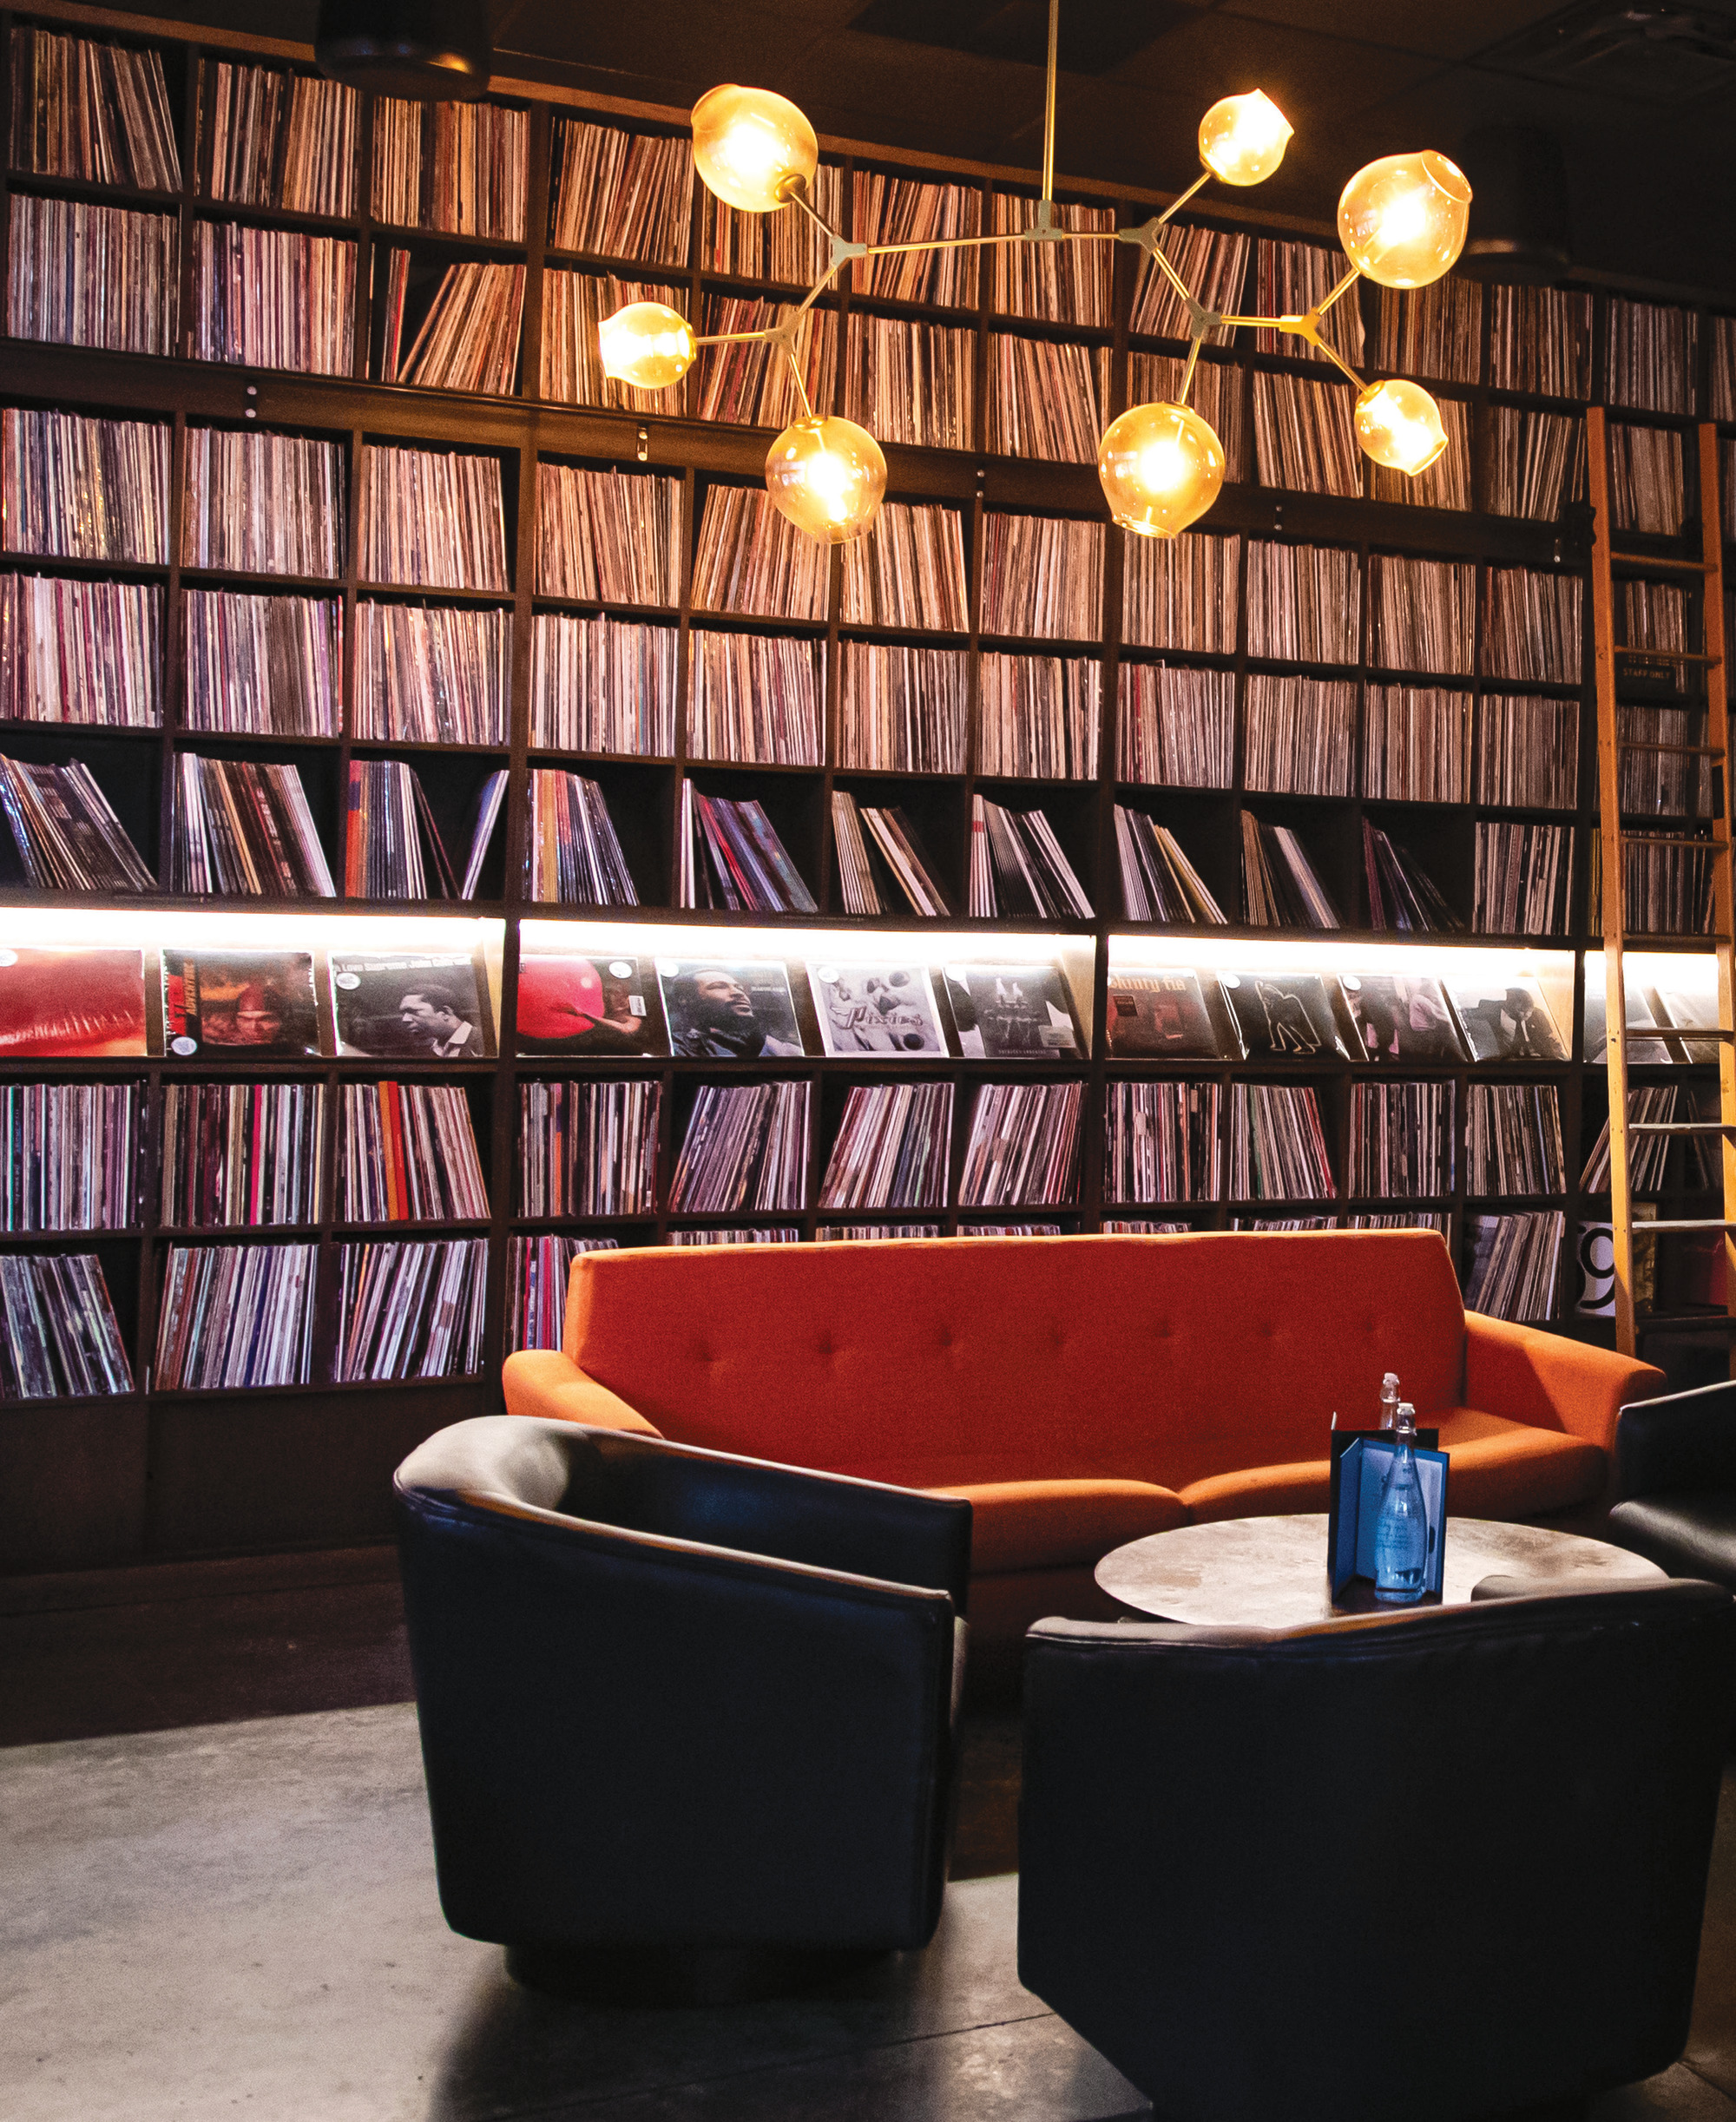 Life on Mars is a plant-based bar packed with vinyl and a cocktail menu that features low- and no-alcohol options.